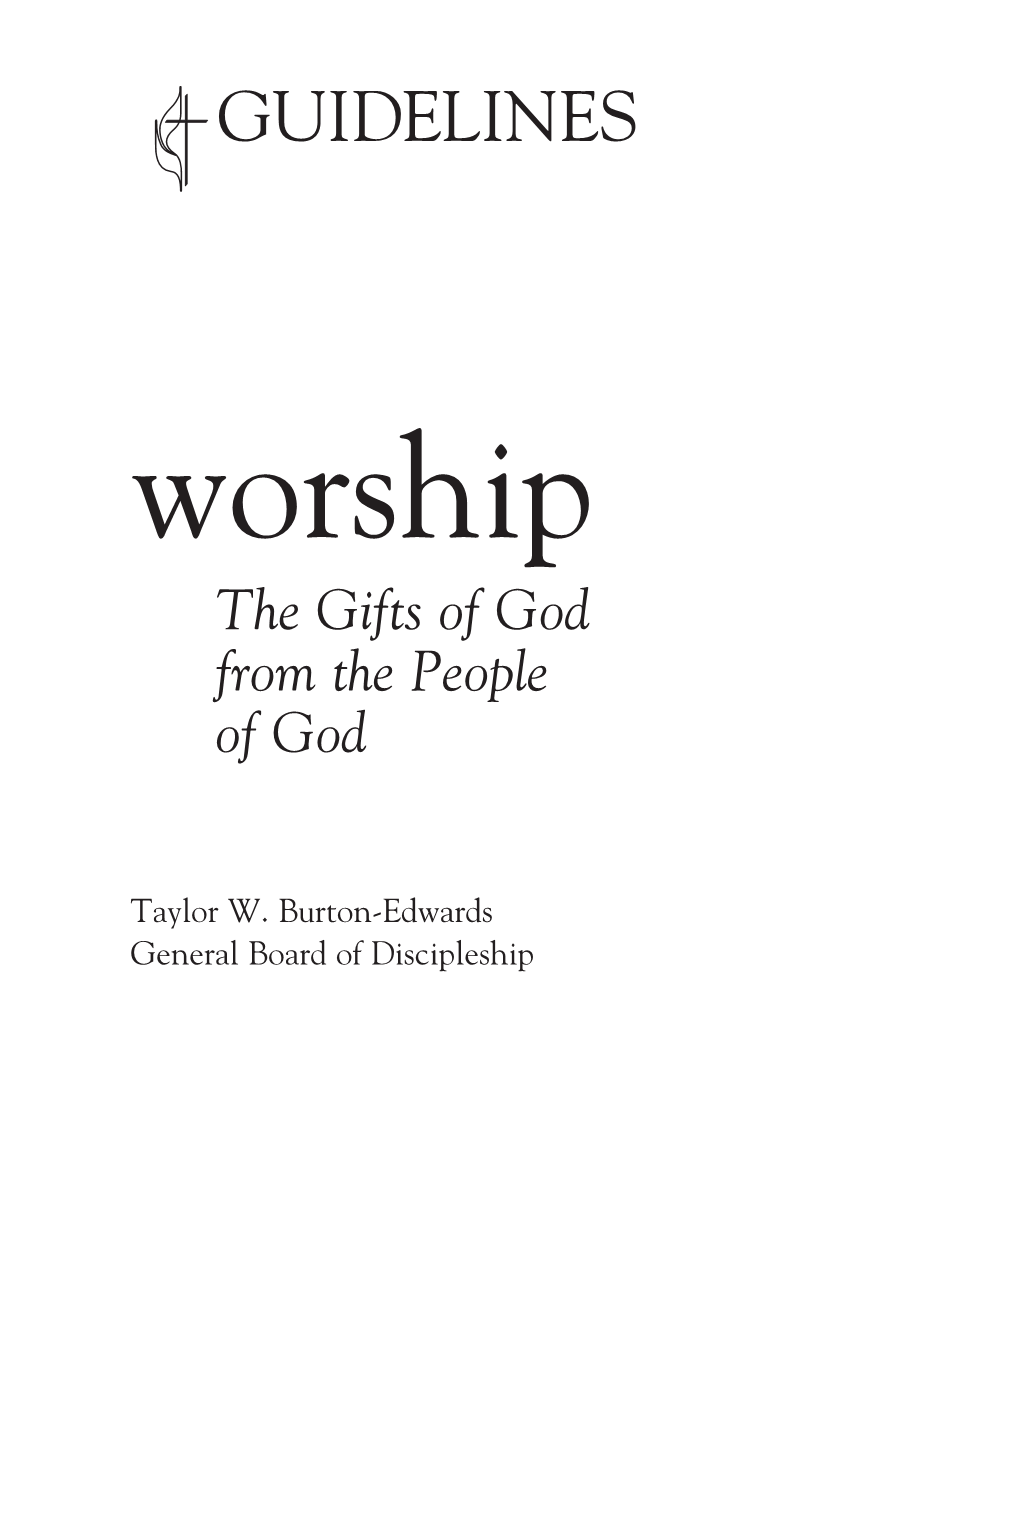 Worship the Gifts of God from the People of God